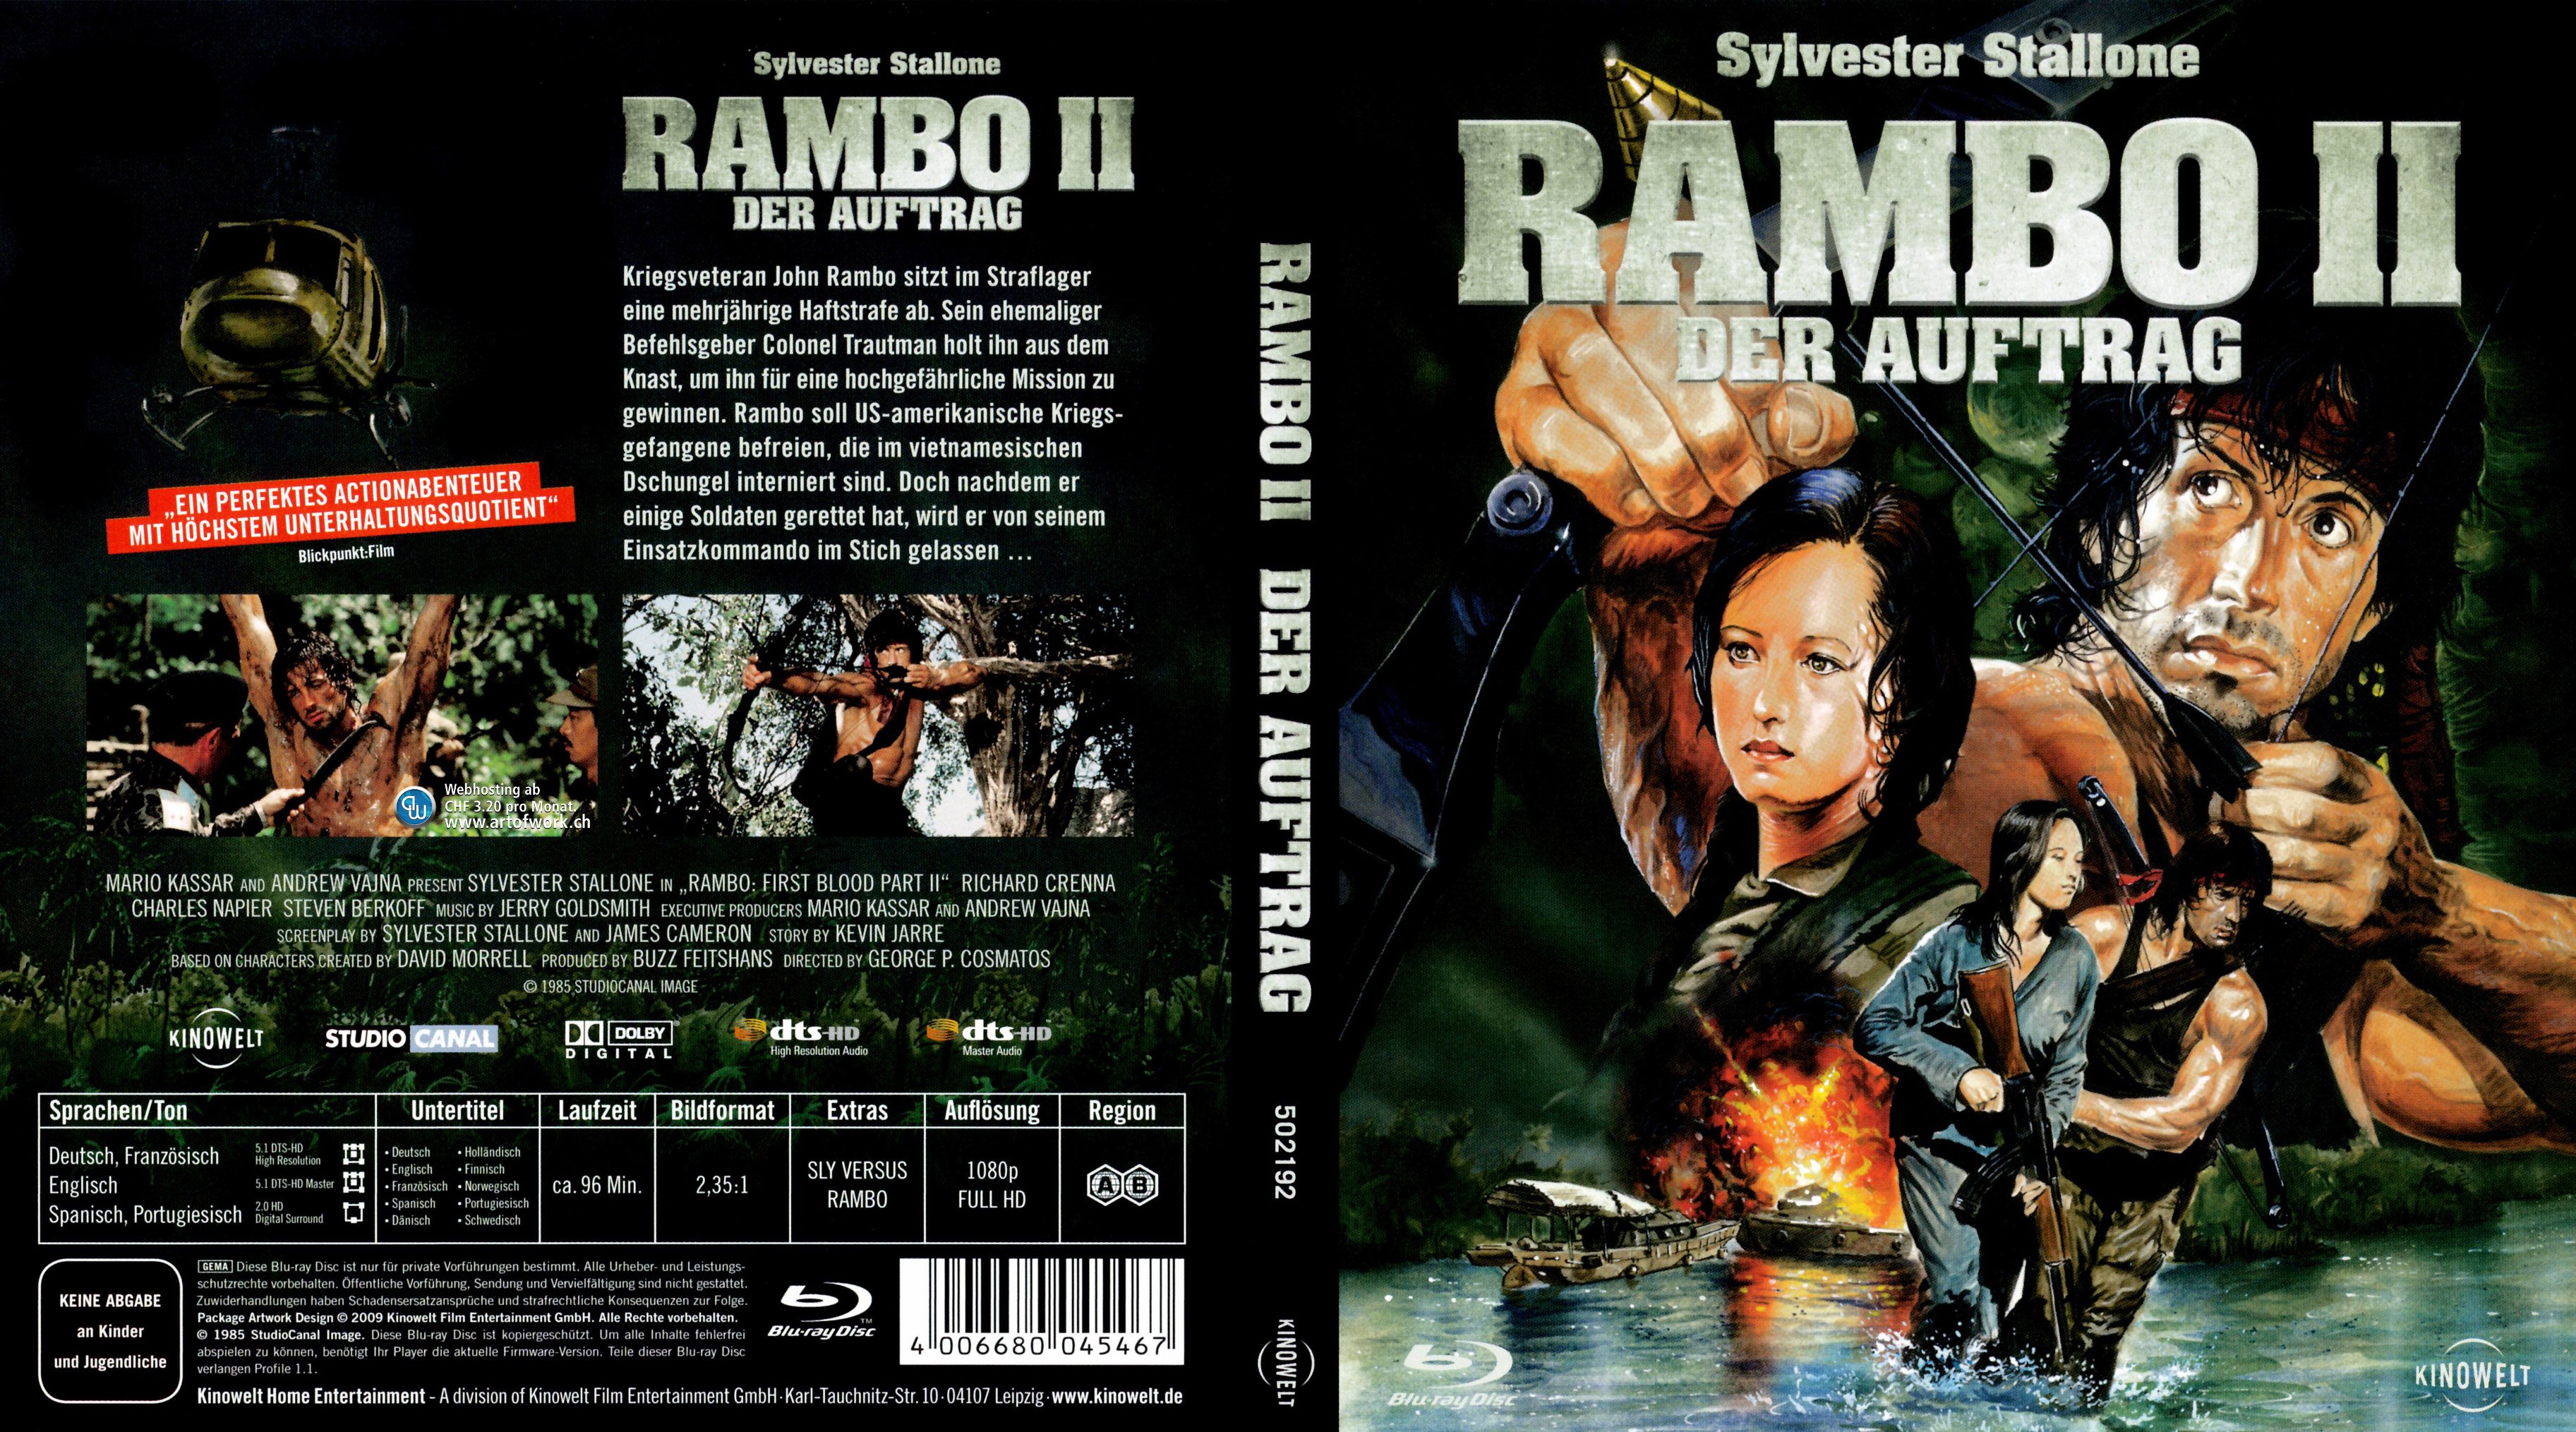 Rambo 2 Der Auftrag Blu Ray Covers Cover Century Over 1 000 000 Album Art Covers For Free